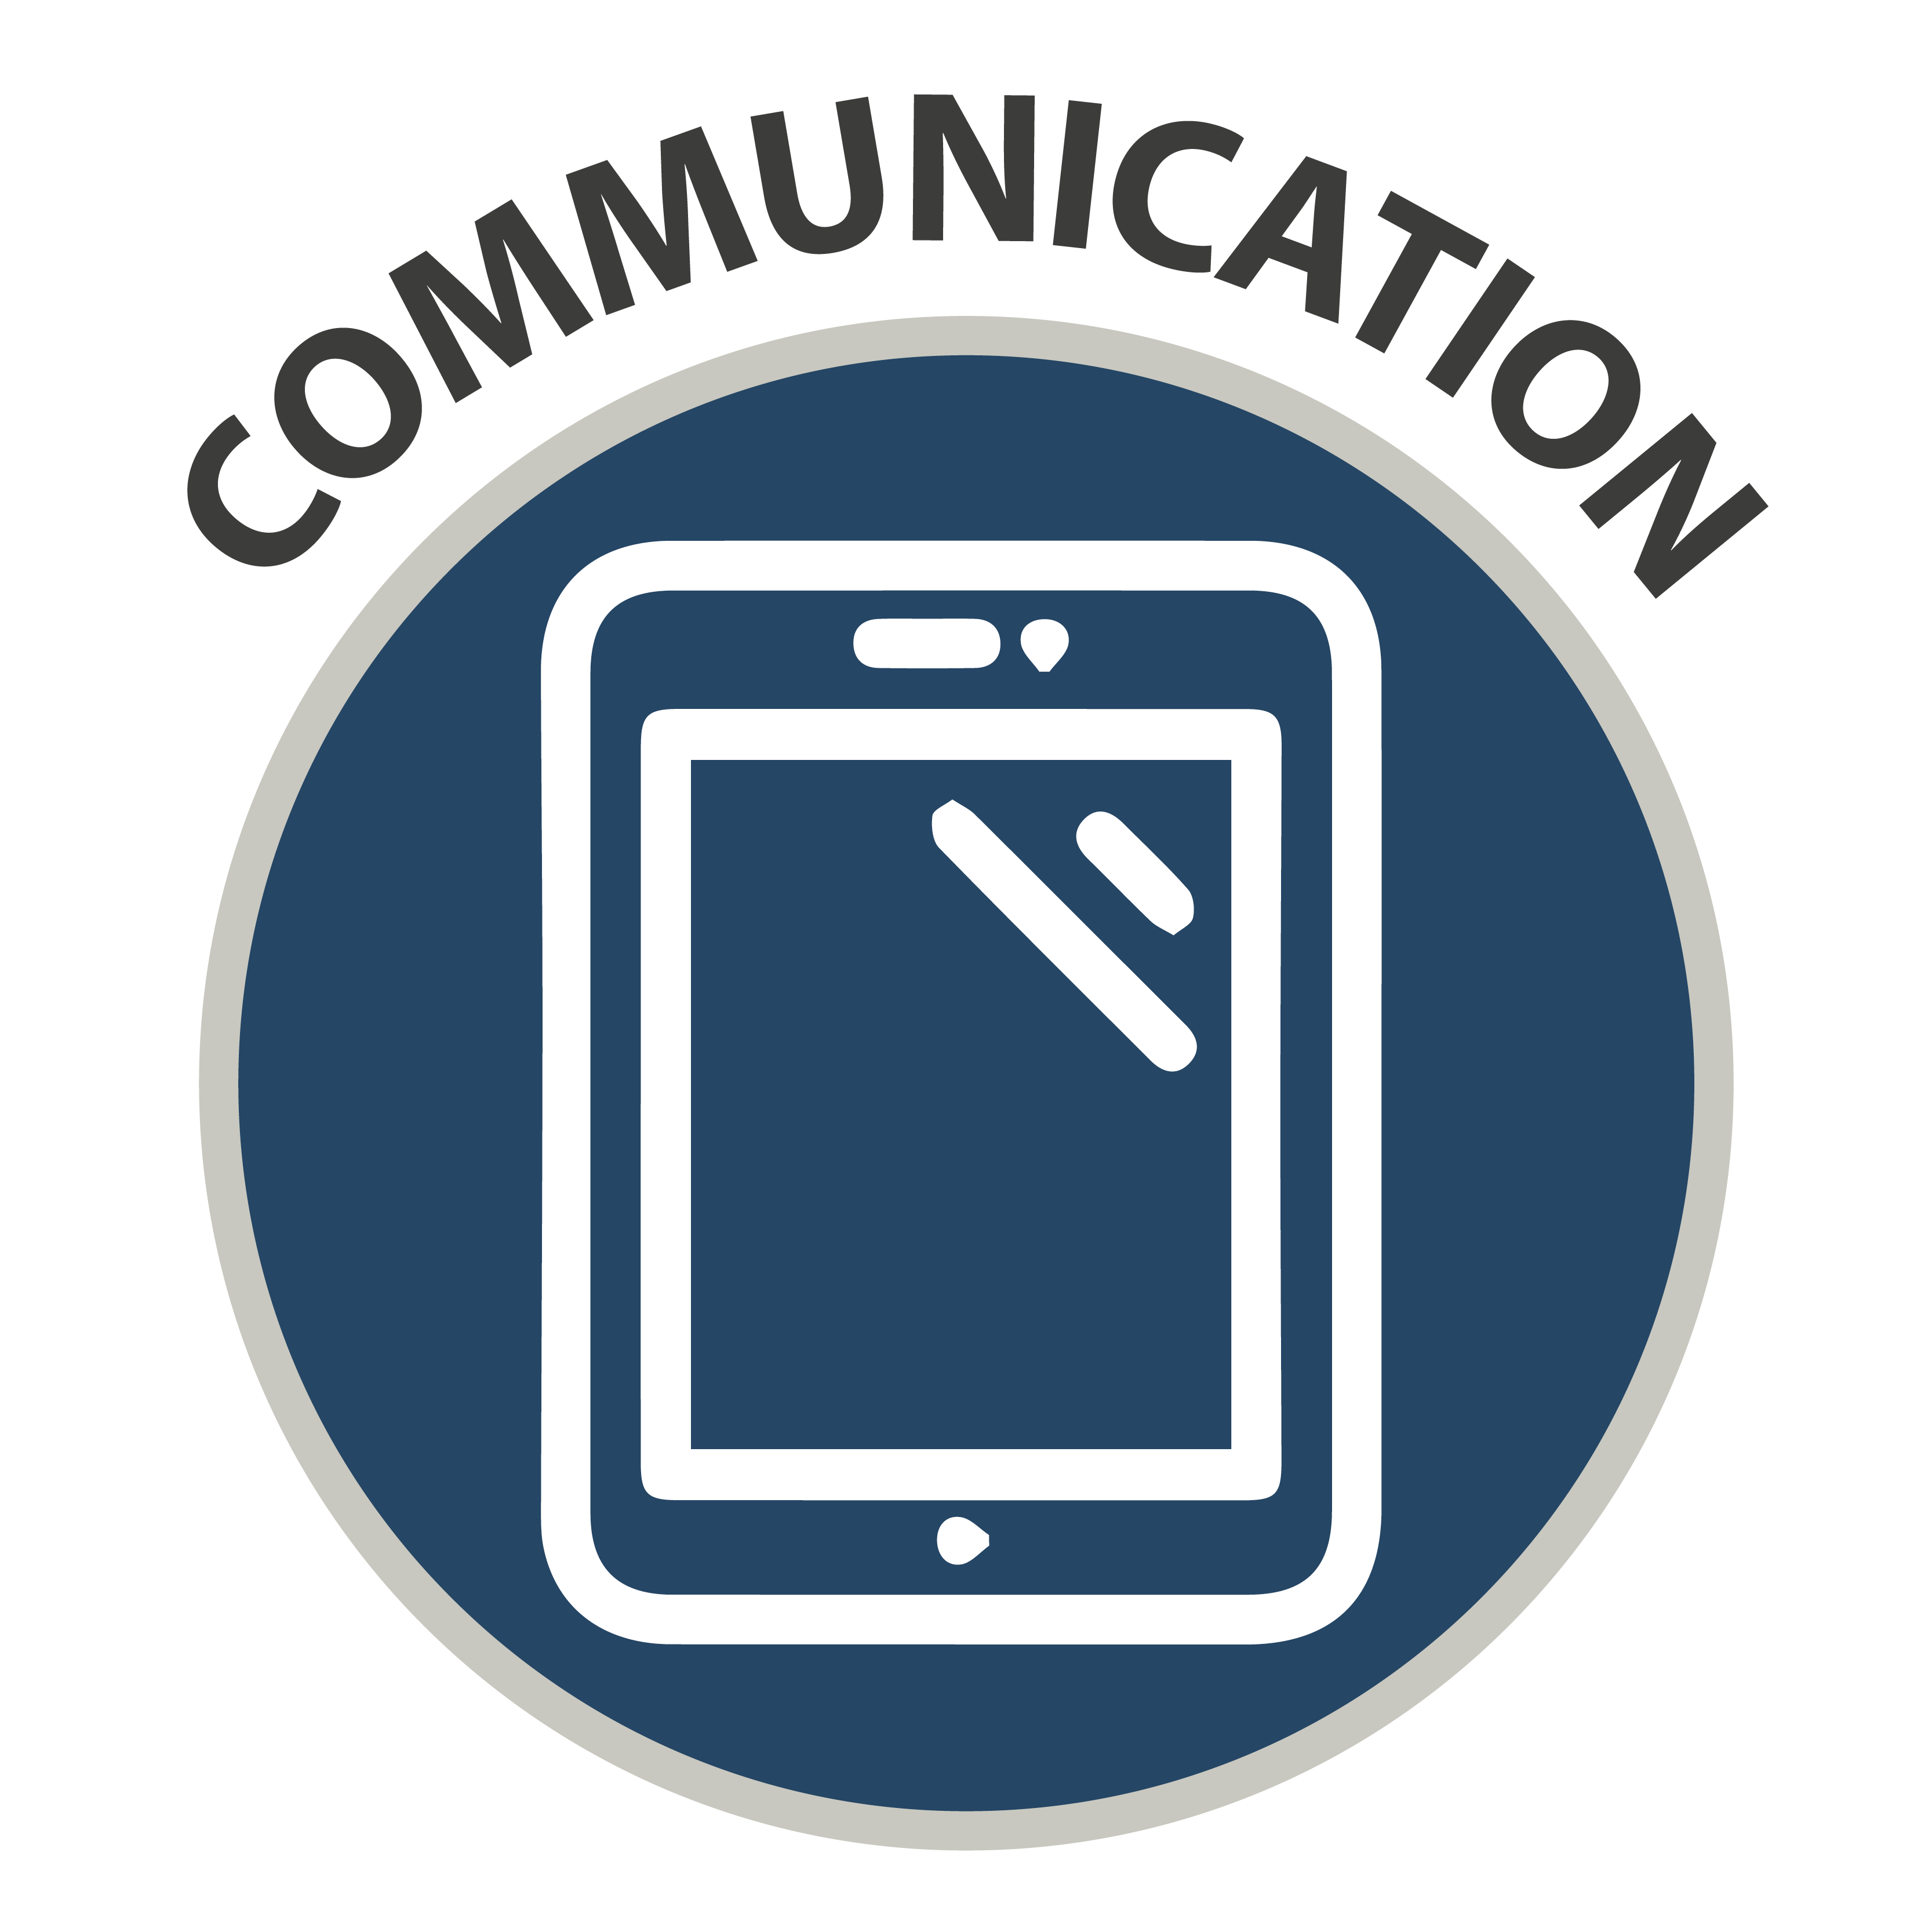 Communication - icon of tablet device